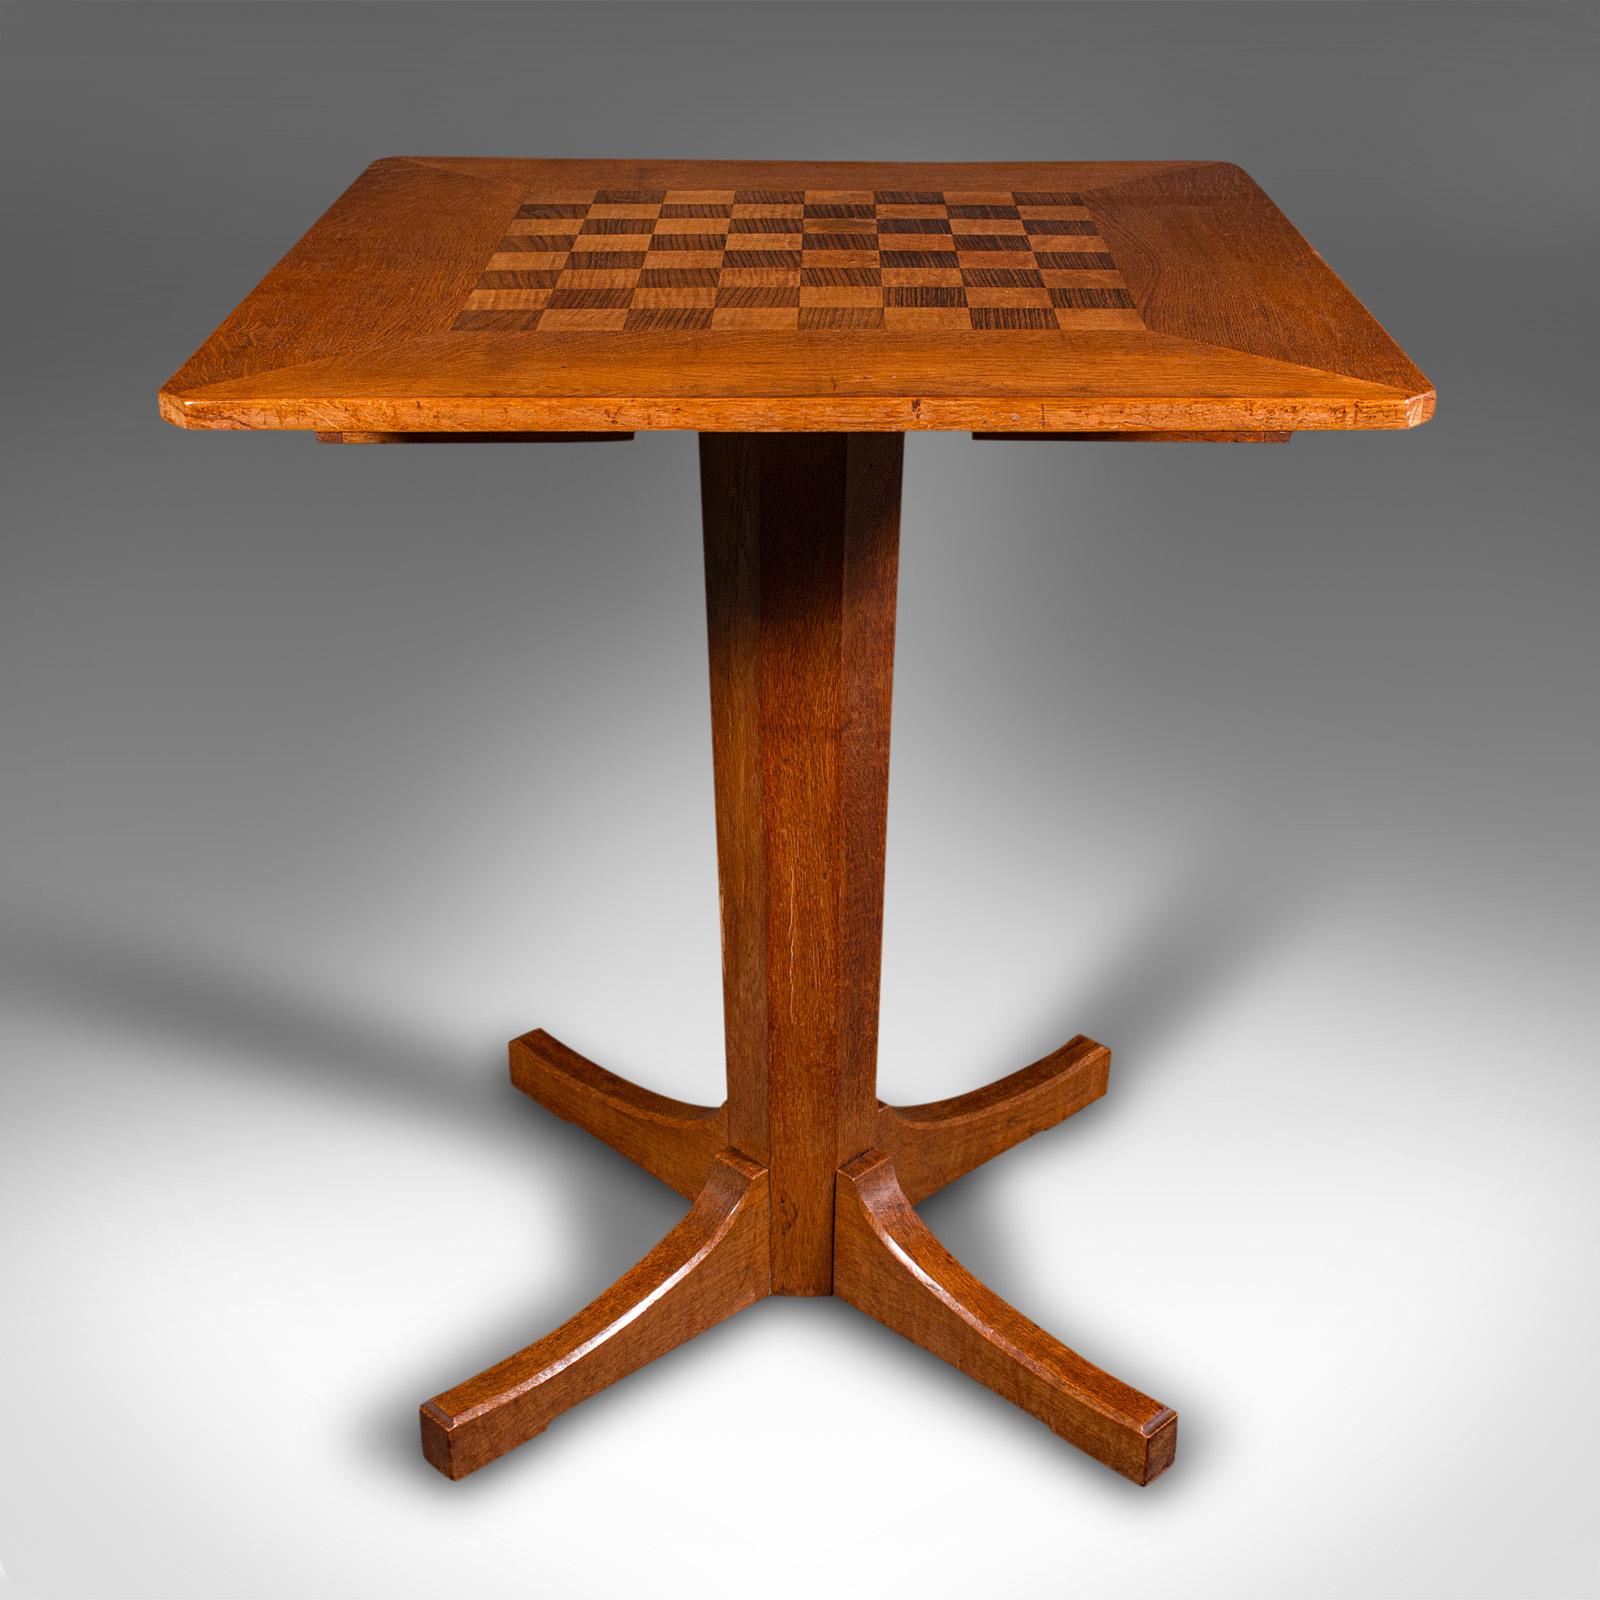 This is an vintage chess table. An English, oak, satinwood and walnut games table in Cotswold School taste, dating to the mid 20th century, circa 1950.

Delightfully presented table with accompanying chess set
Displays a desirable aged patina and in